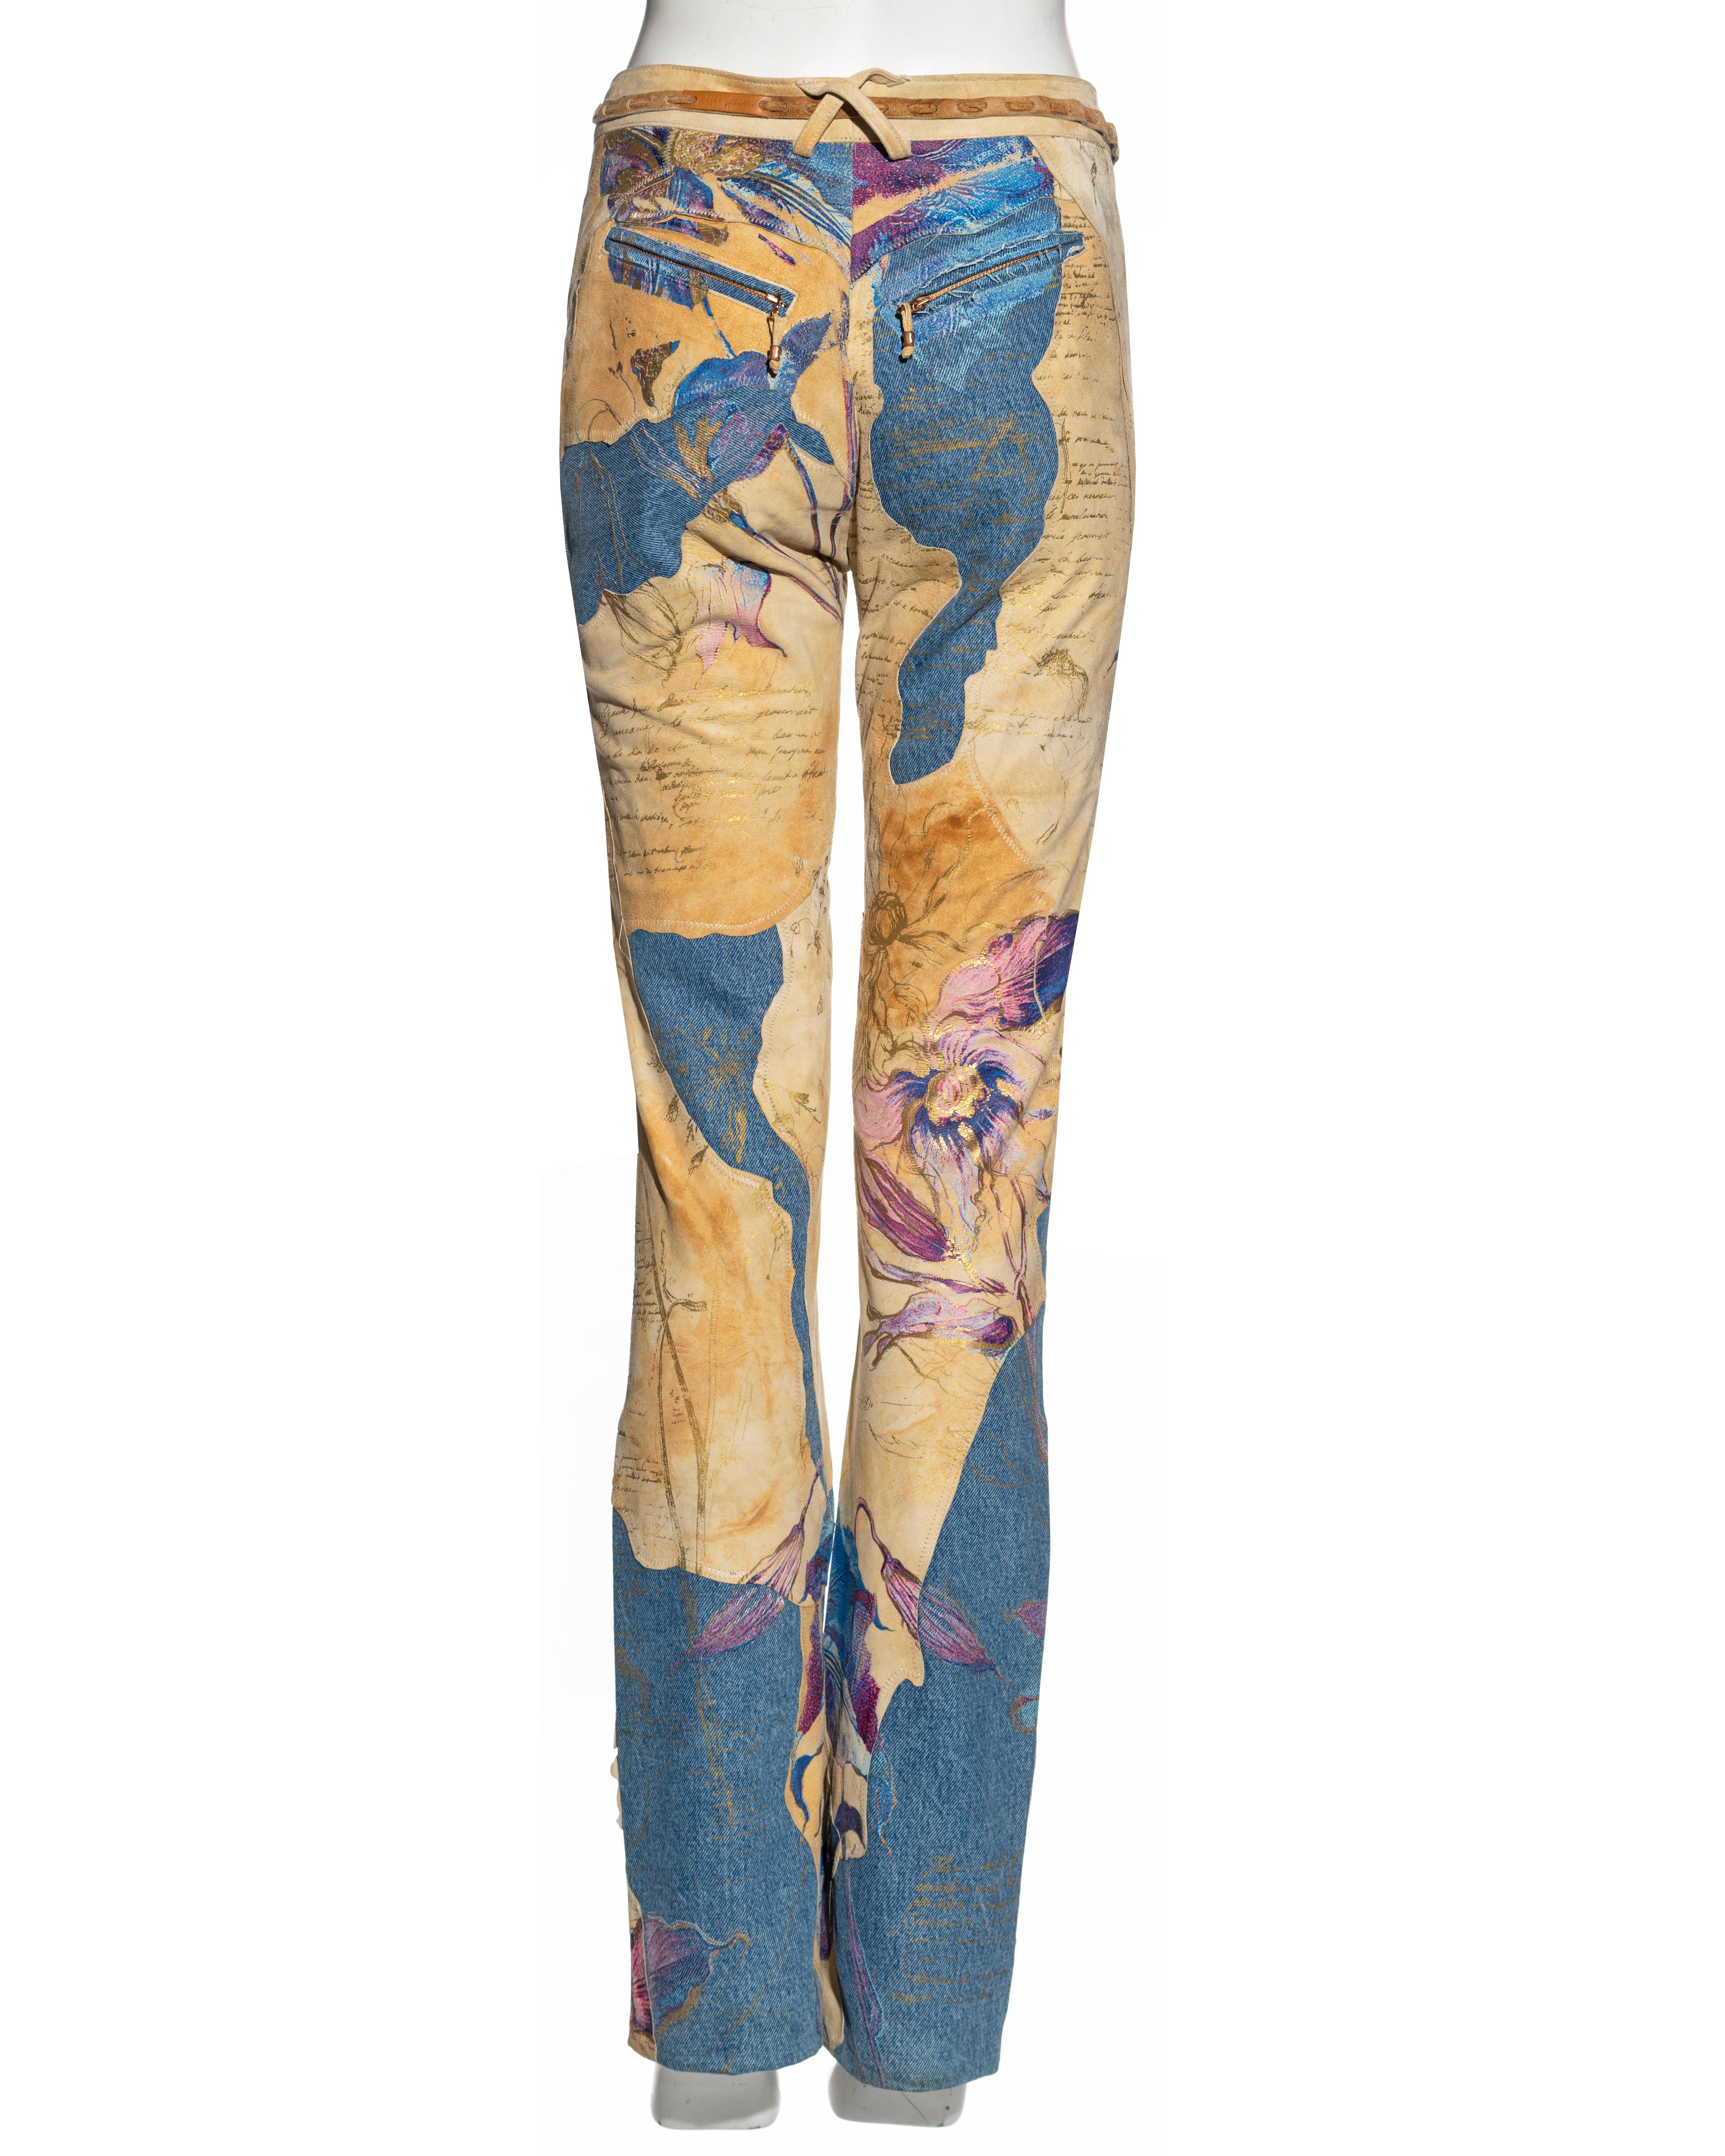 Roberto Cavalli leather and denim patchwork pants with gold foil print, fw 1999 5